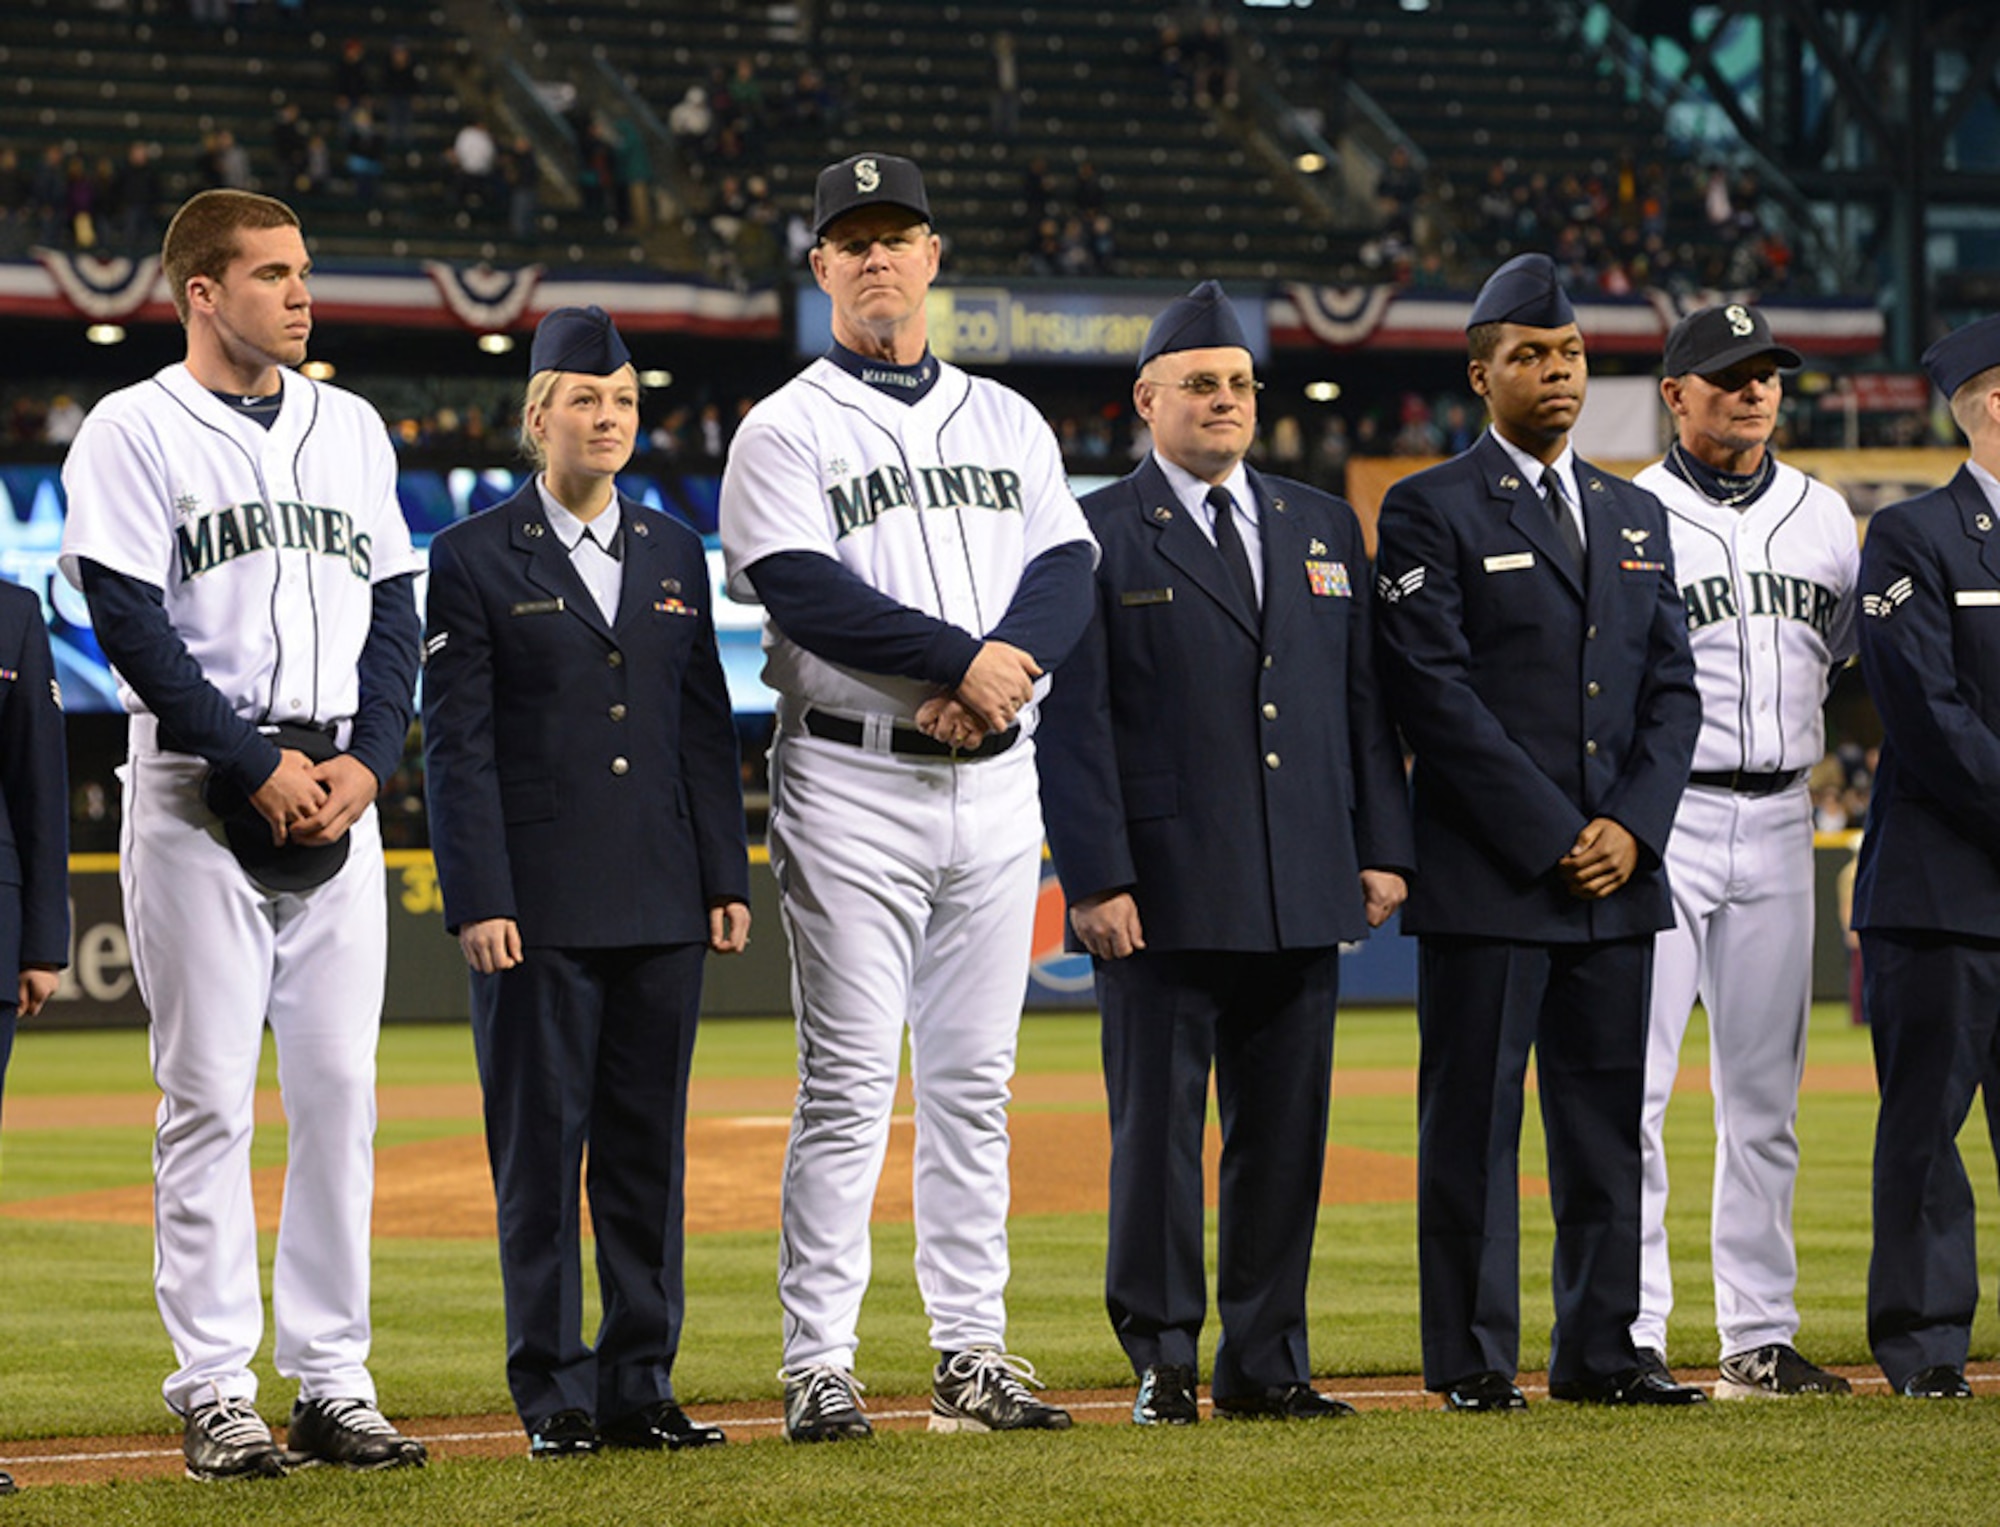 MLB, People Magazine to salute veterans, service members at All